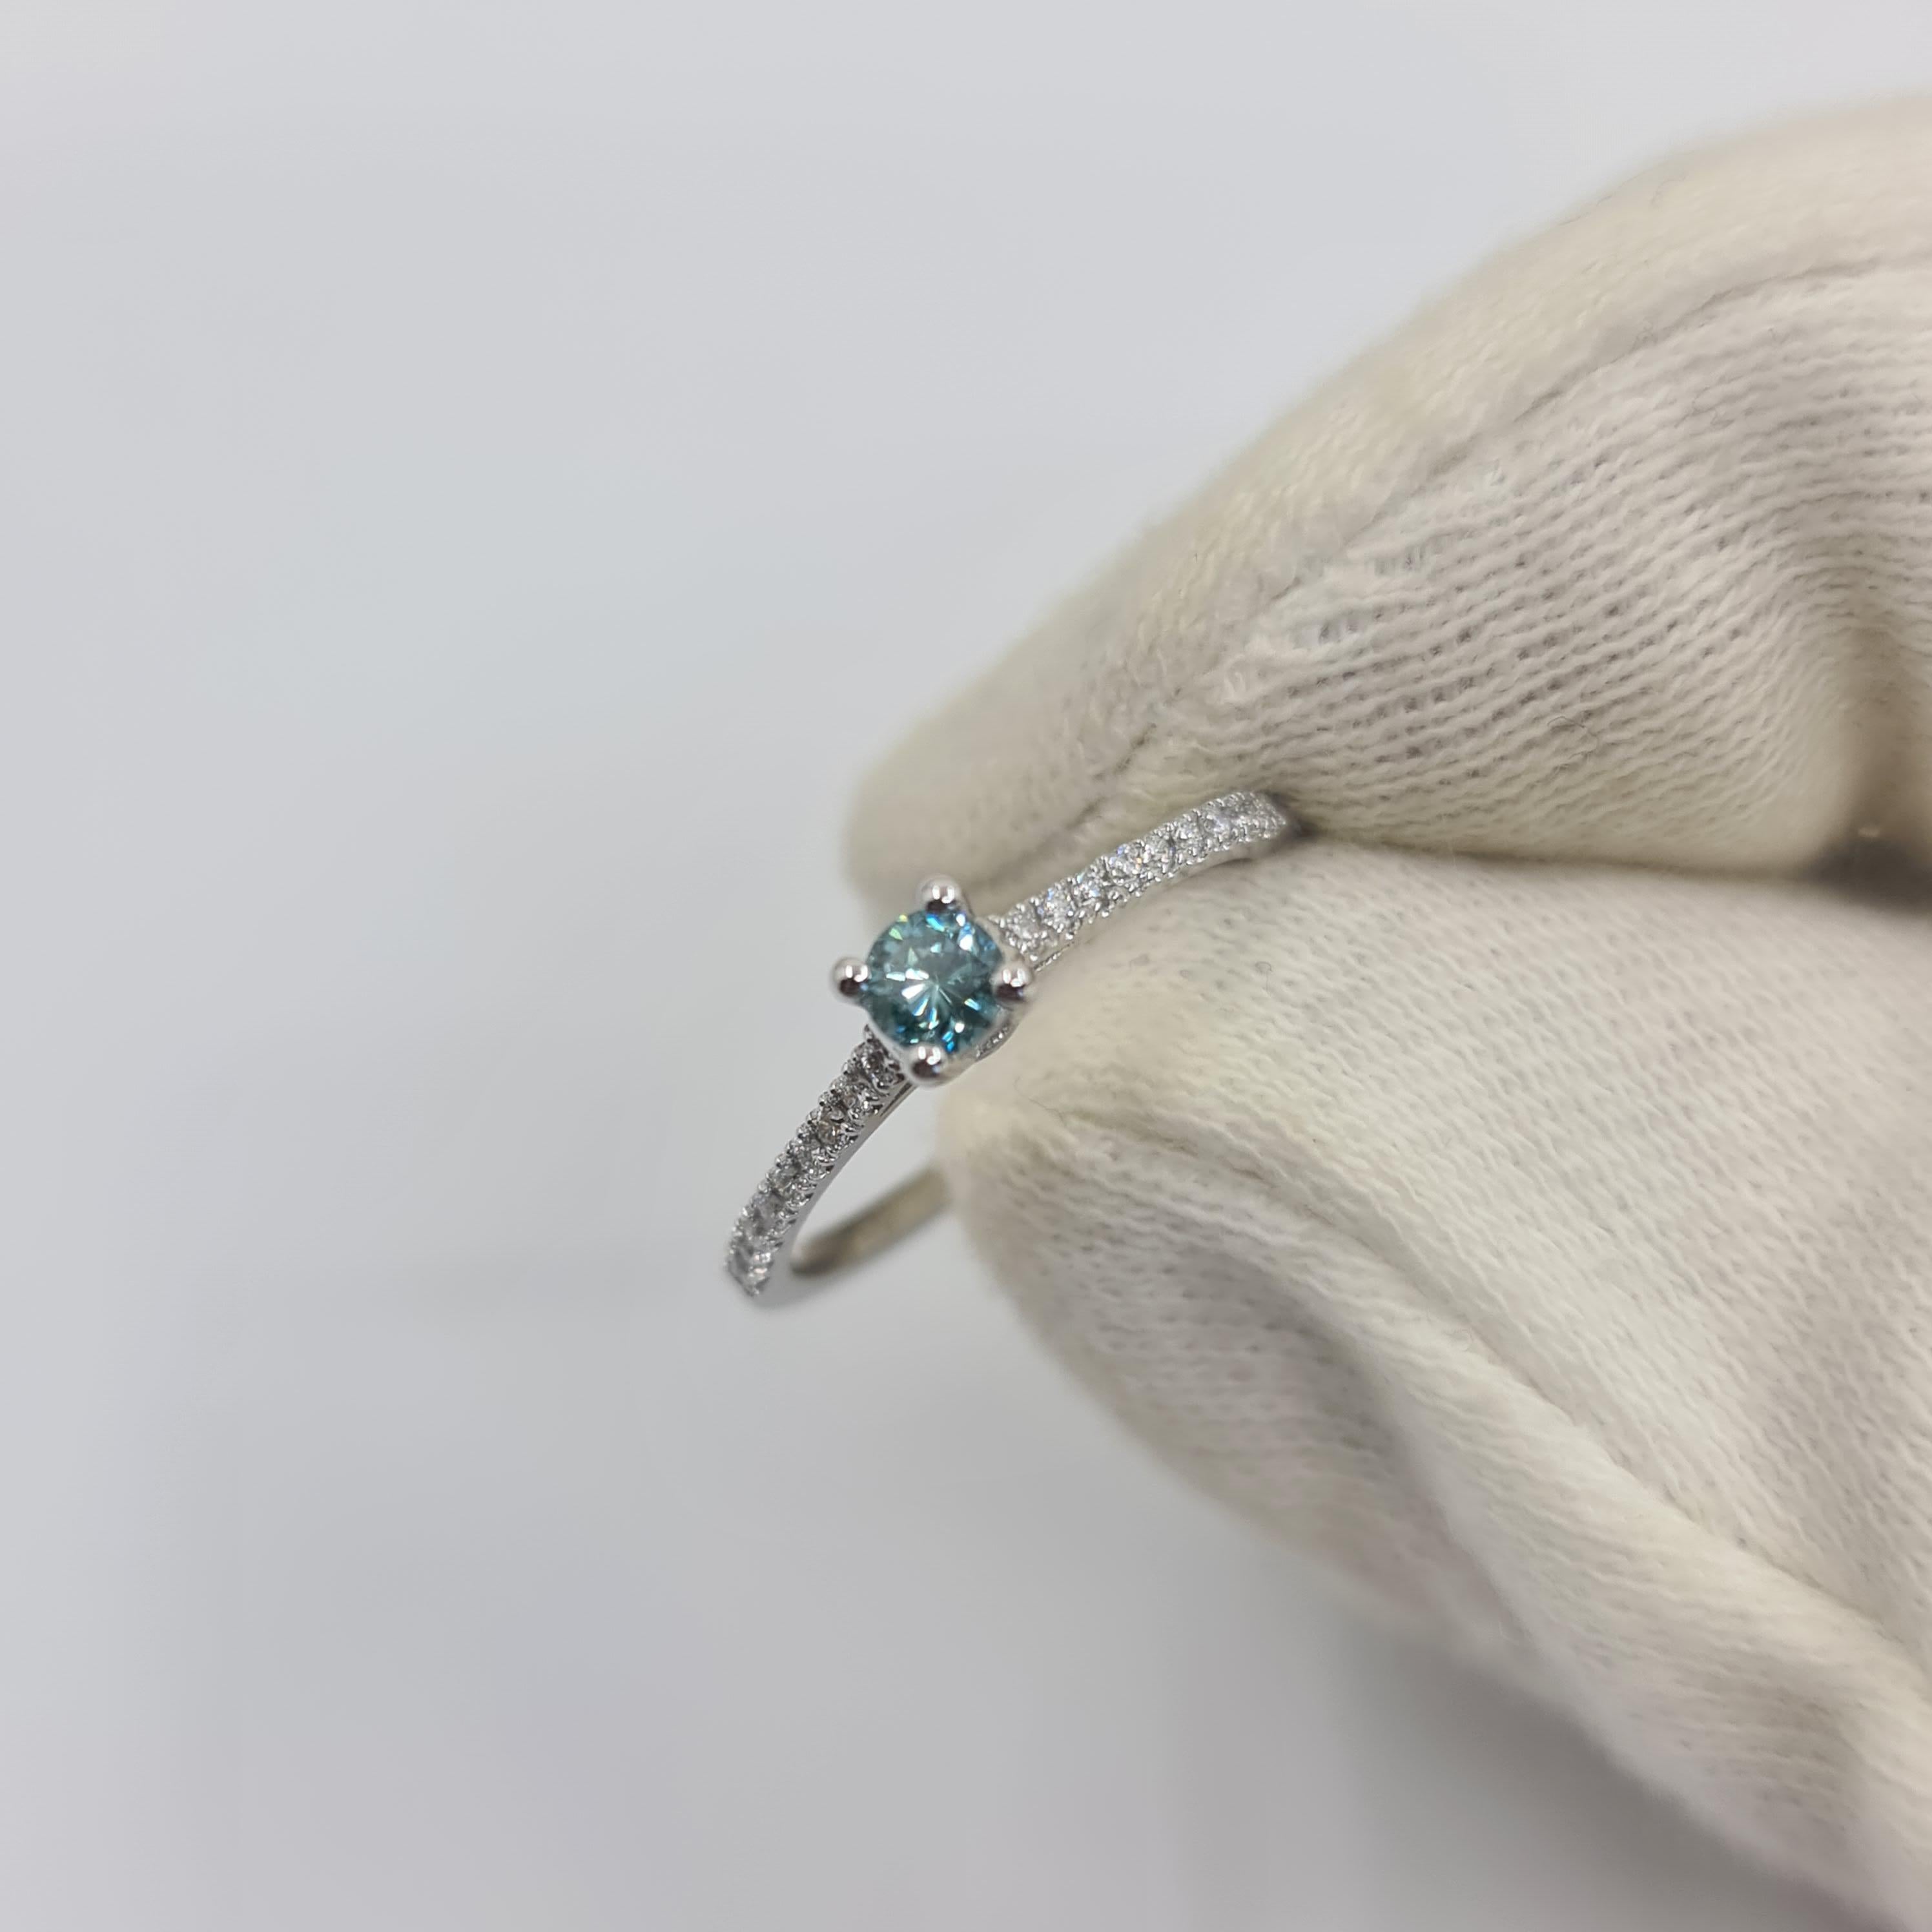 Modern Exquisite GIA Certified Solitaire Diamond Ring 0.18 Carat Fancy Deep Blue-Green  For Sale